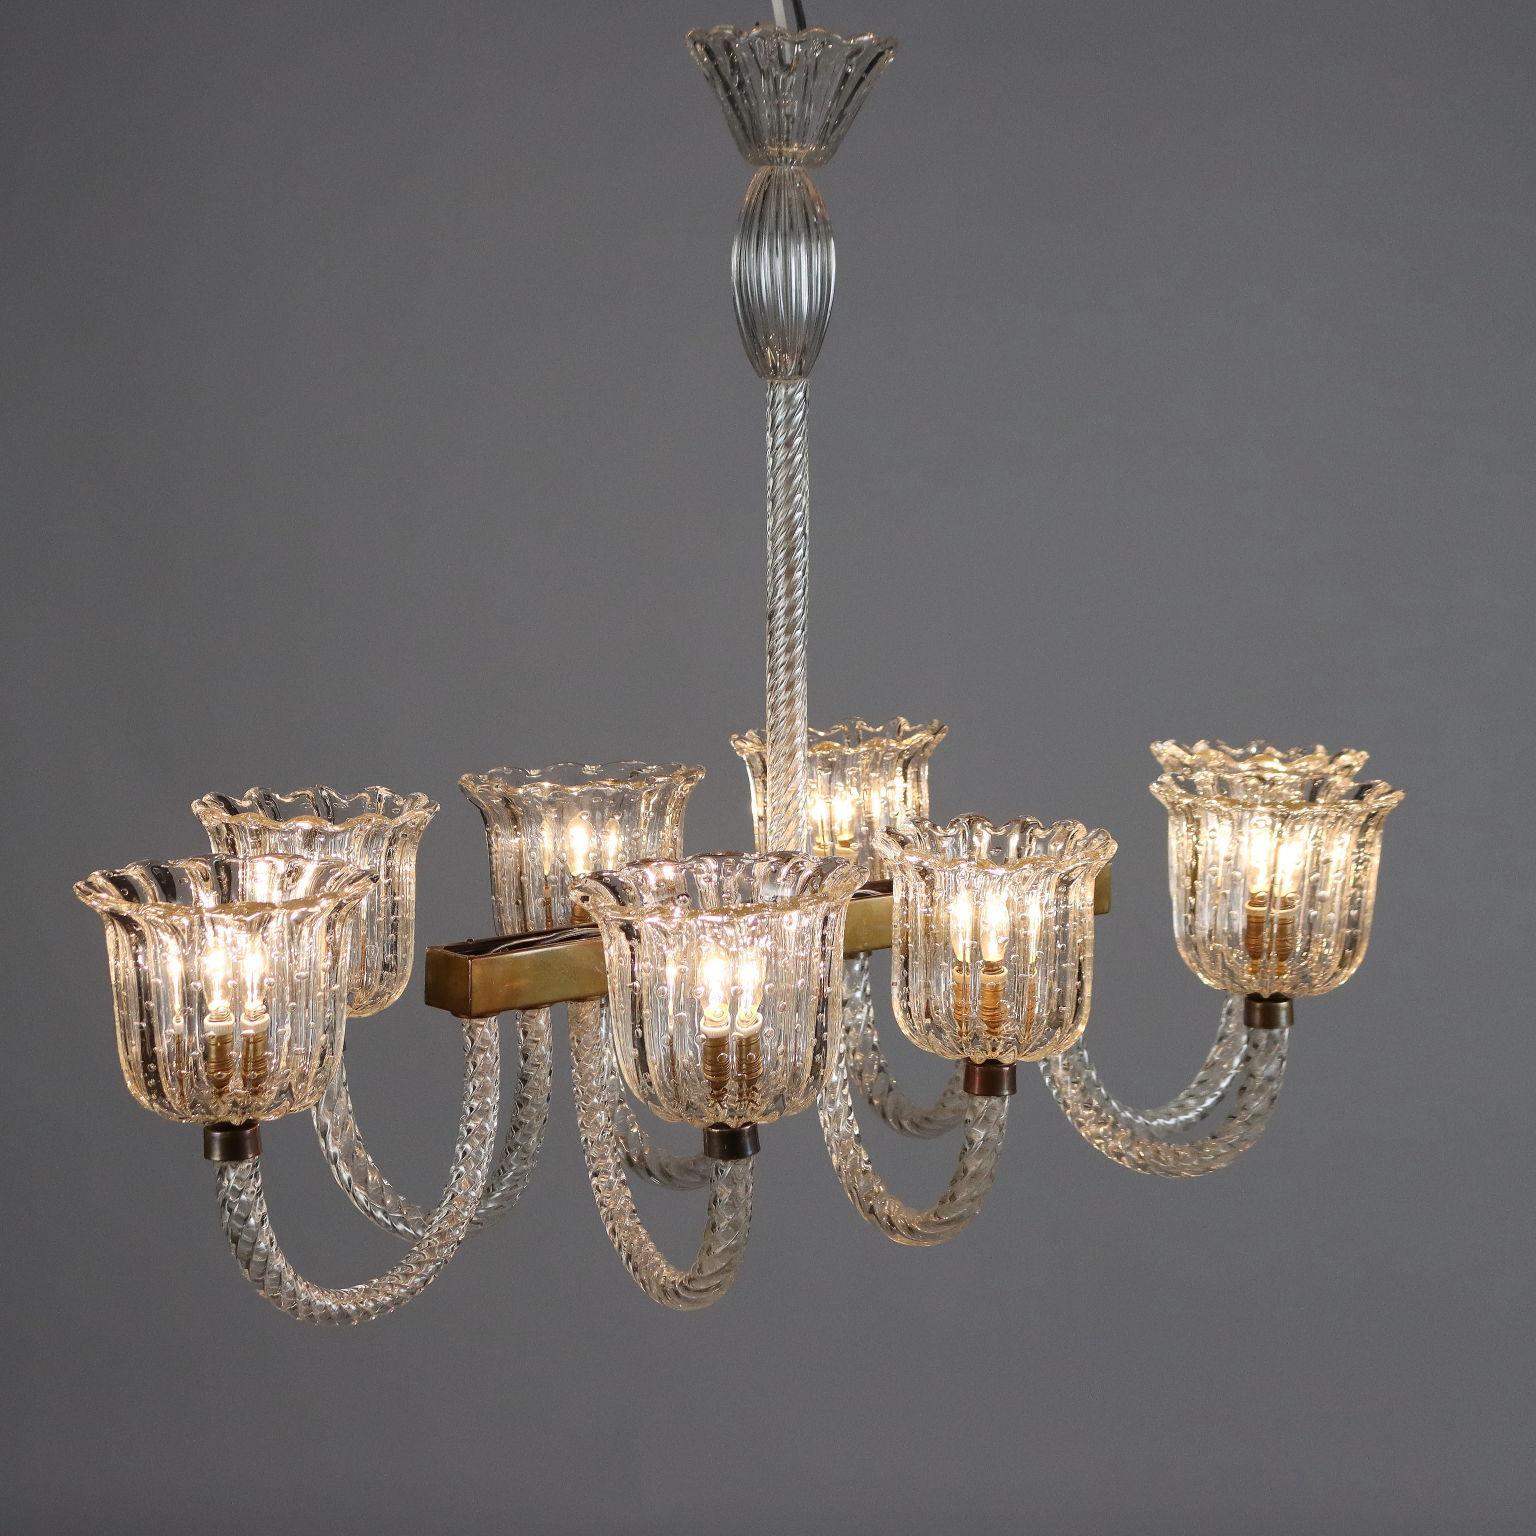 1940s Italian-made eight-point lamp made of Murano glass worked with brass details. 